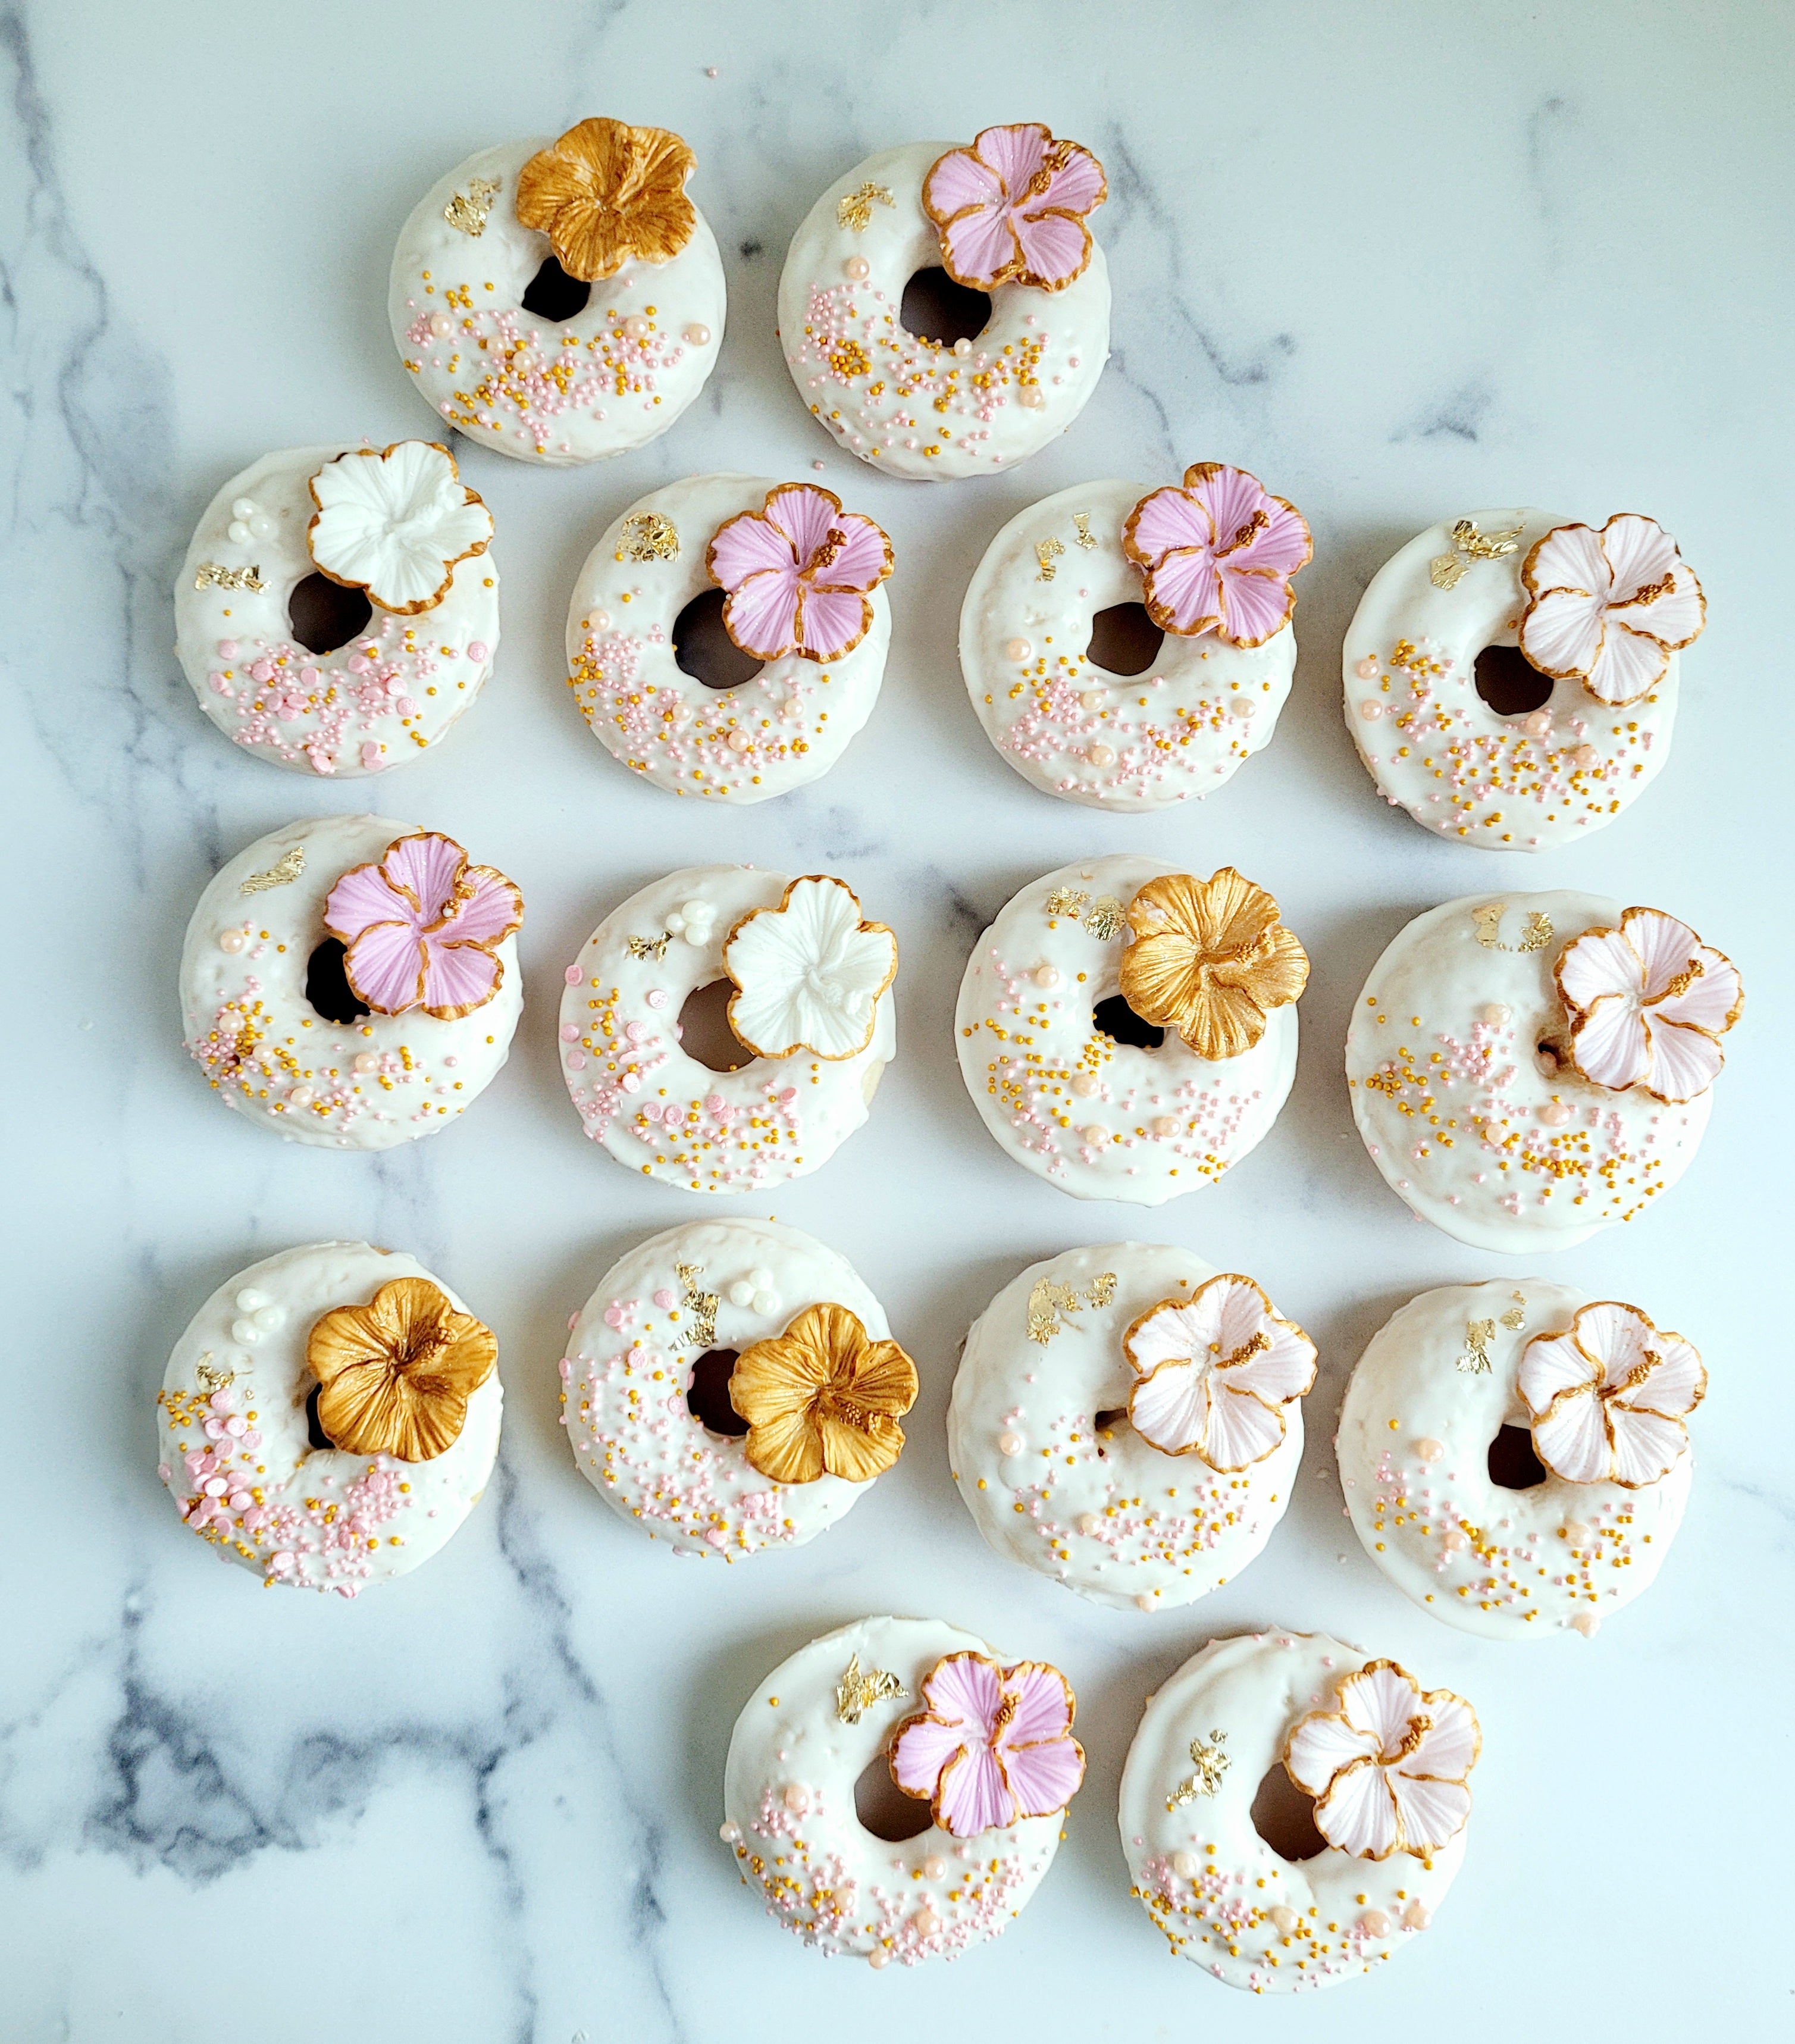 Customized donuts for a white, pink and gold wedding.